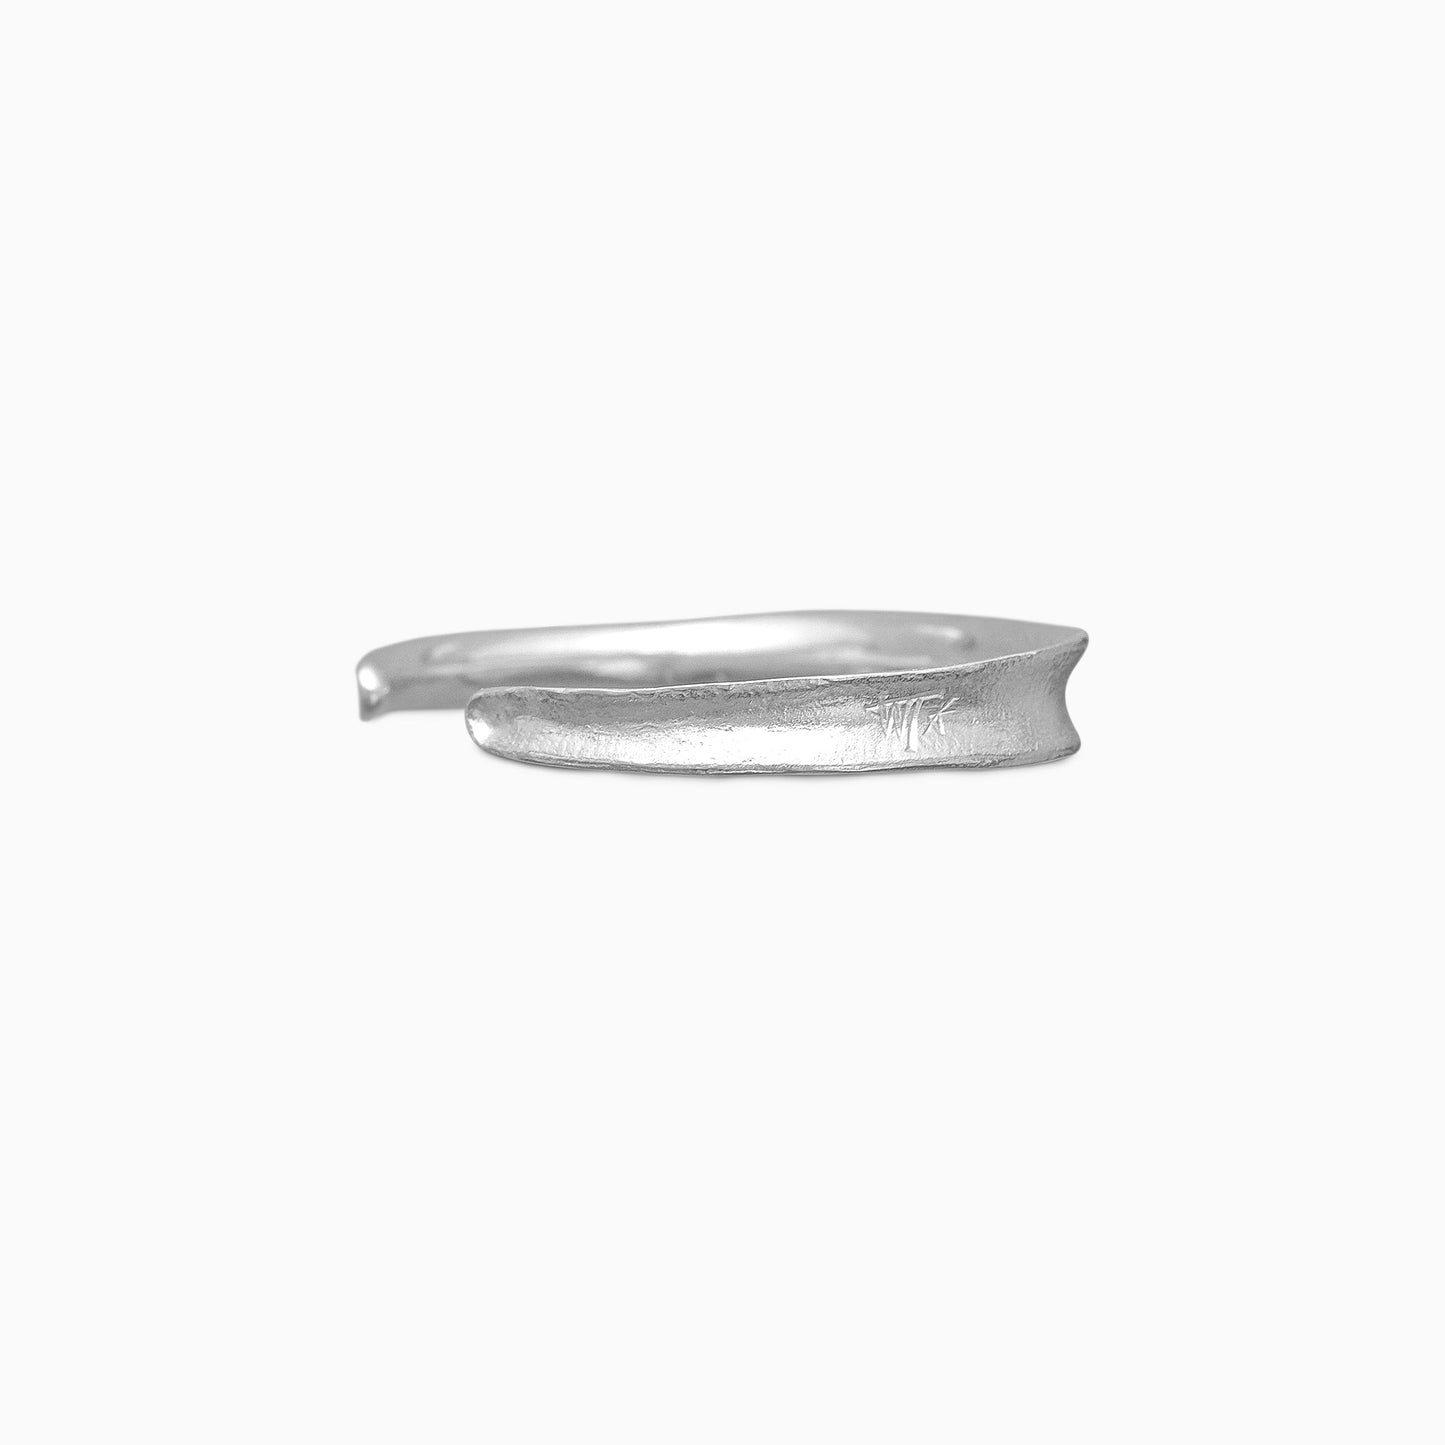 A recycled Silver Cuff bangle fitting close to wrist. Concave and textured. Open ended to get on and off. Width 8mm. Inside oval diameter 65mm.